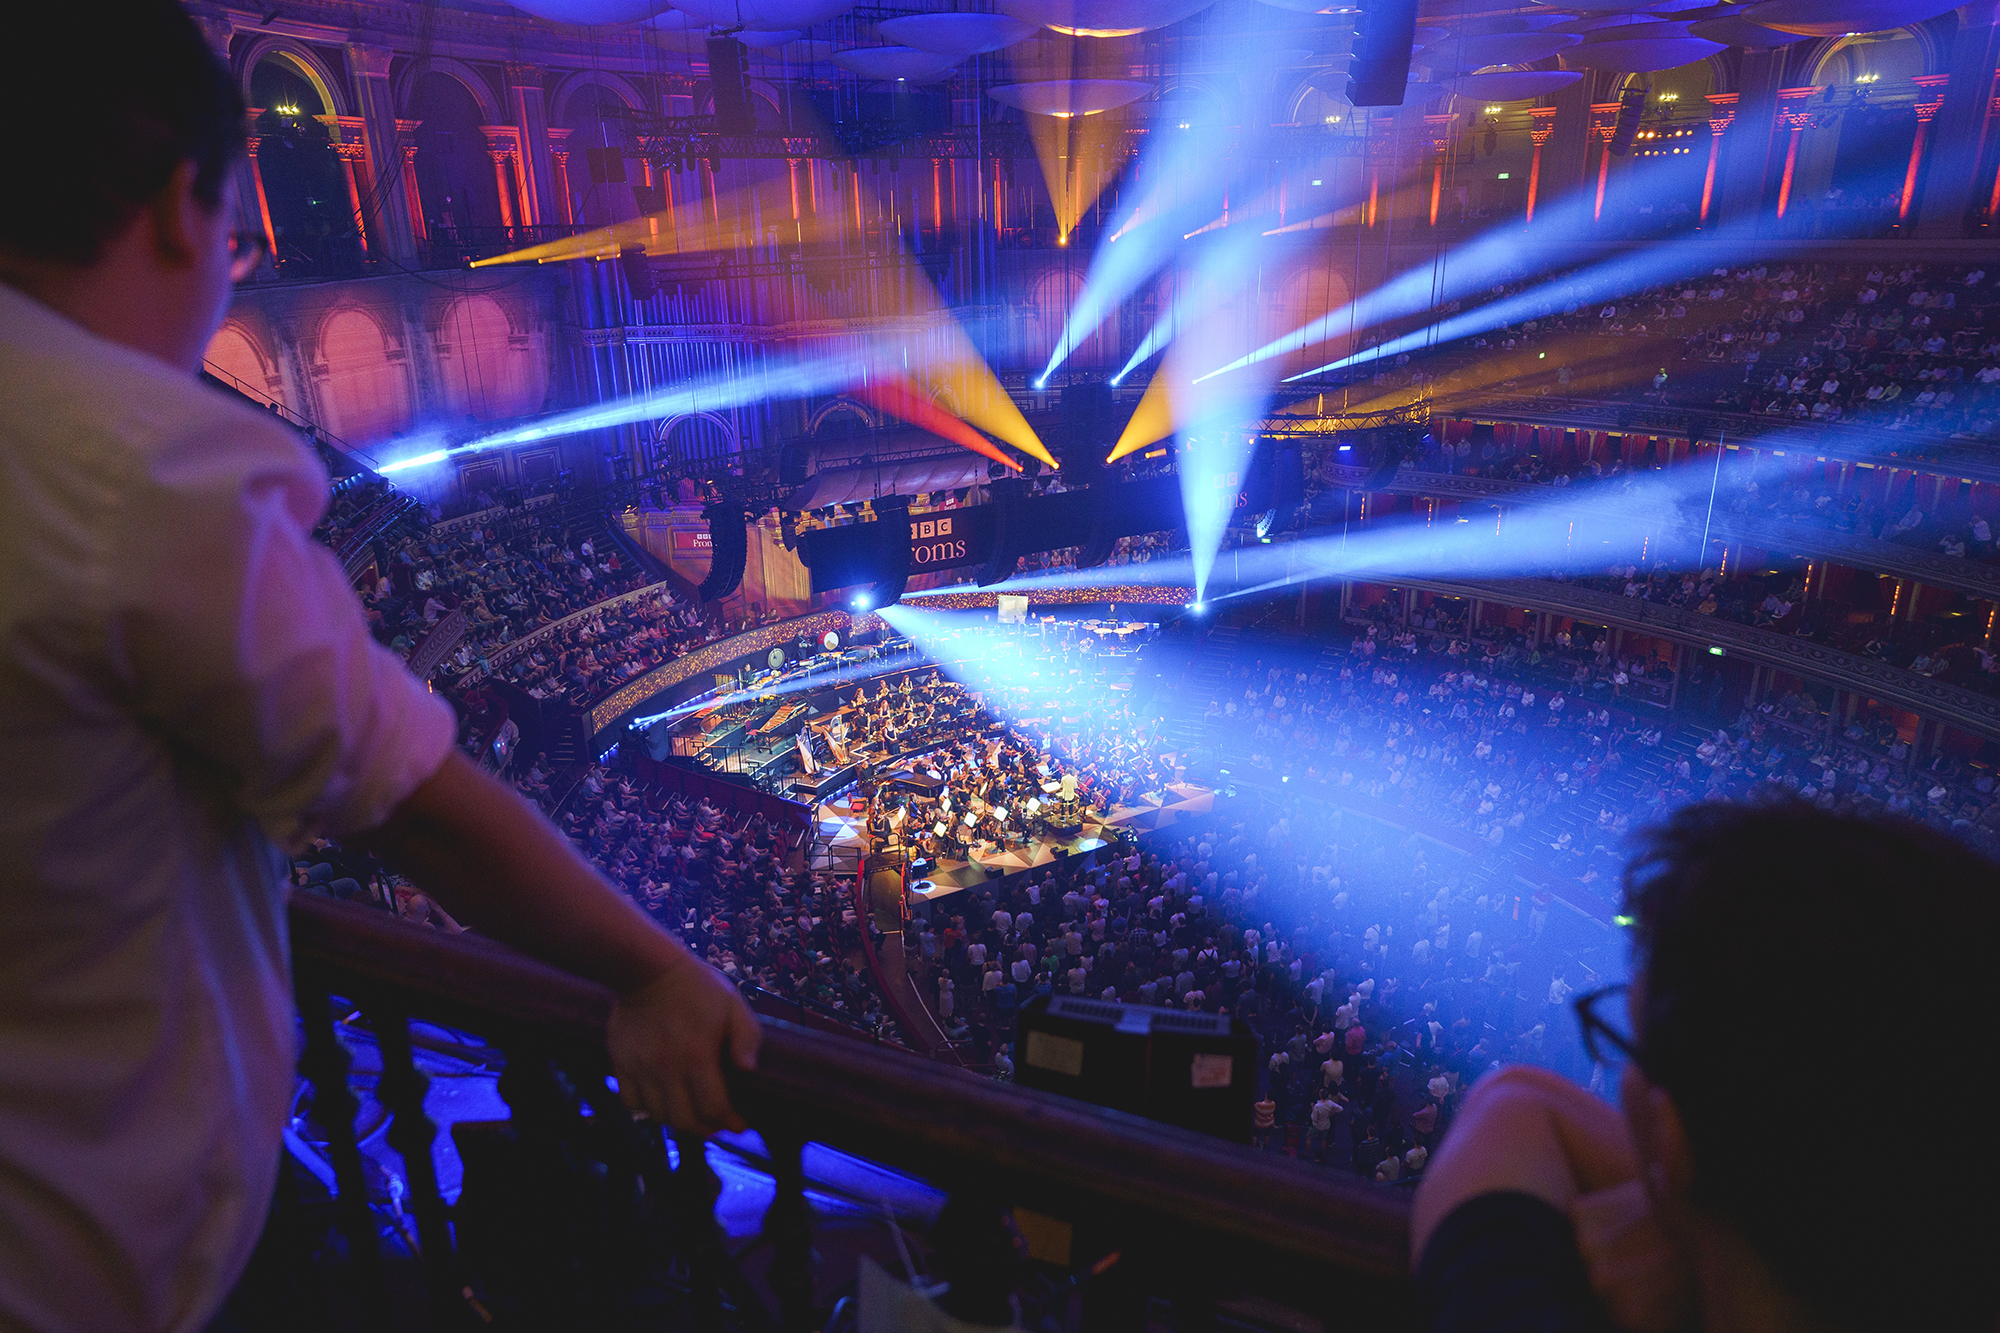 Circle Prom 21 1 August Video Games BBC Proms RPO Royal Albert Hall c Andy Paradise